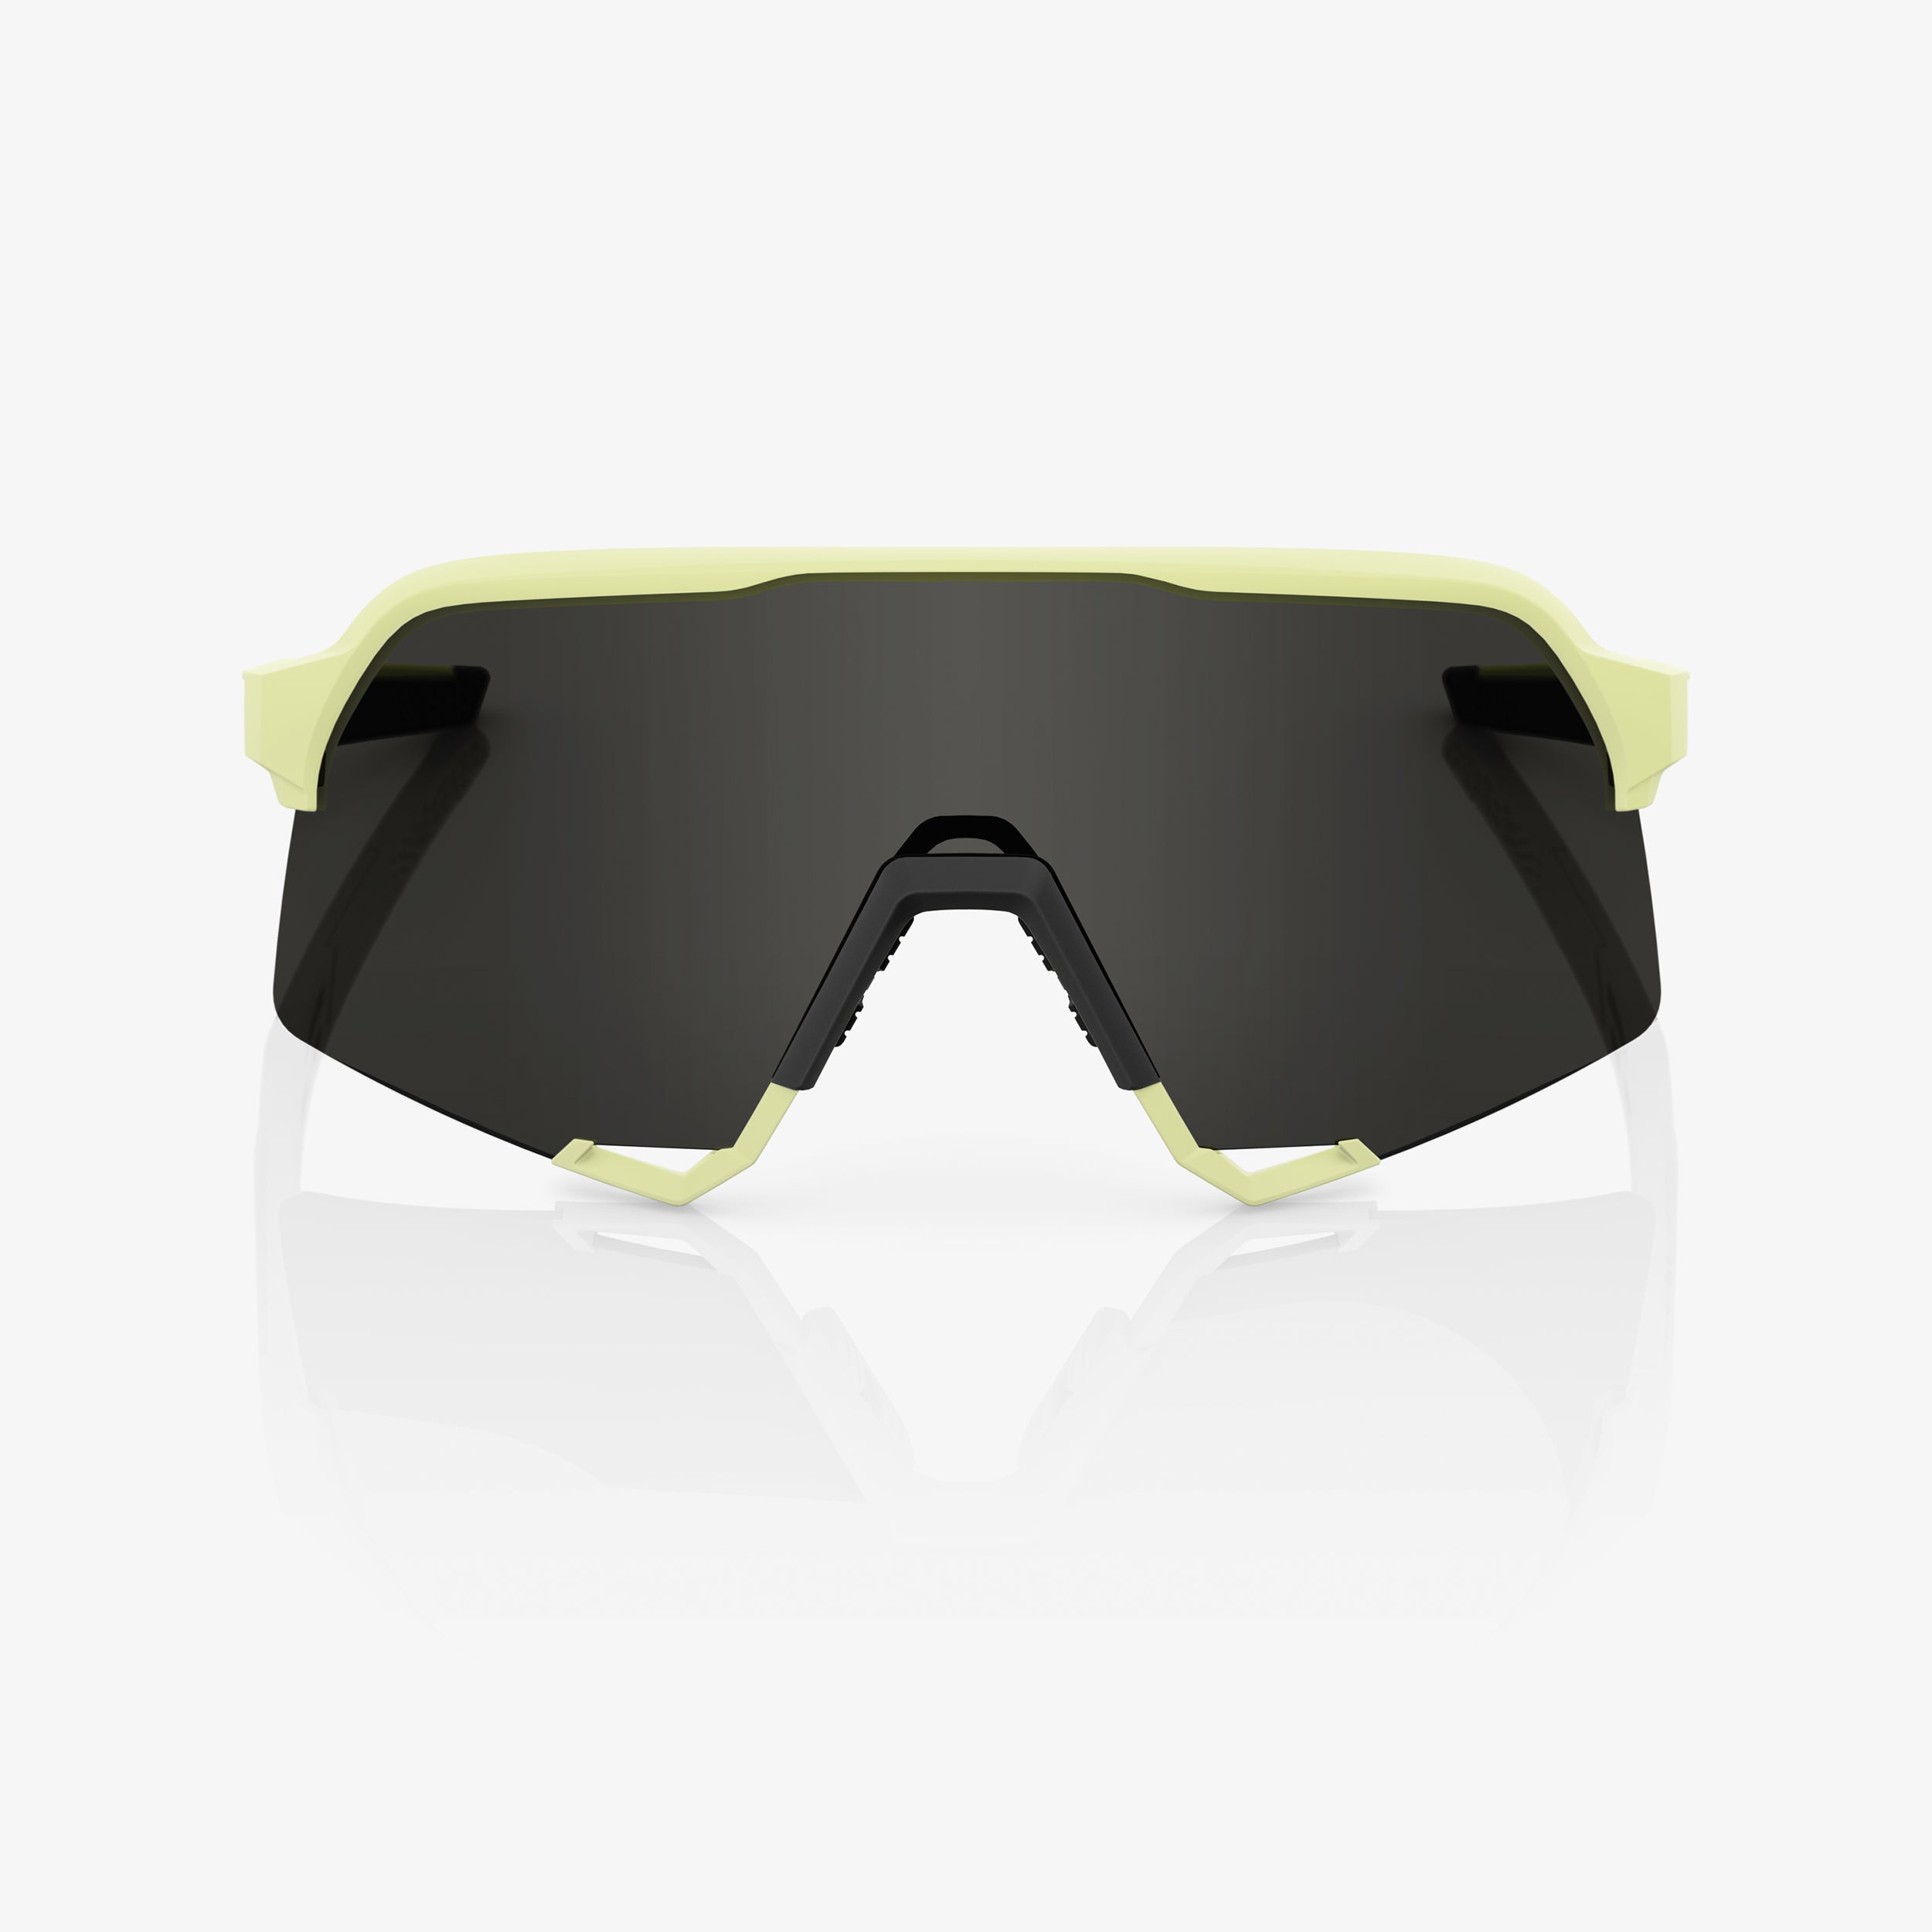 S3™ Soft Tact Glow - Black Mirror Lens - Secondary